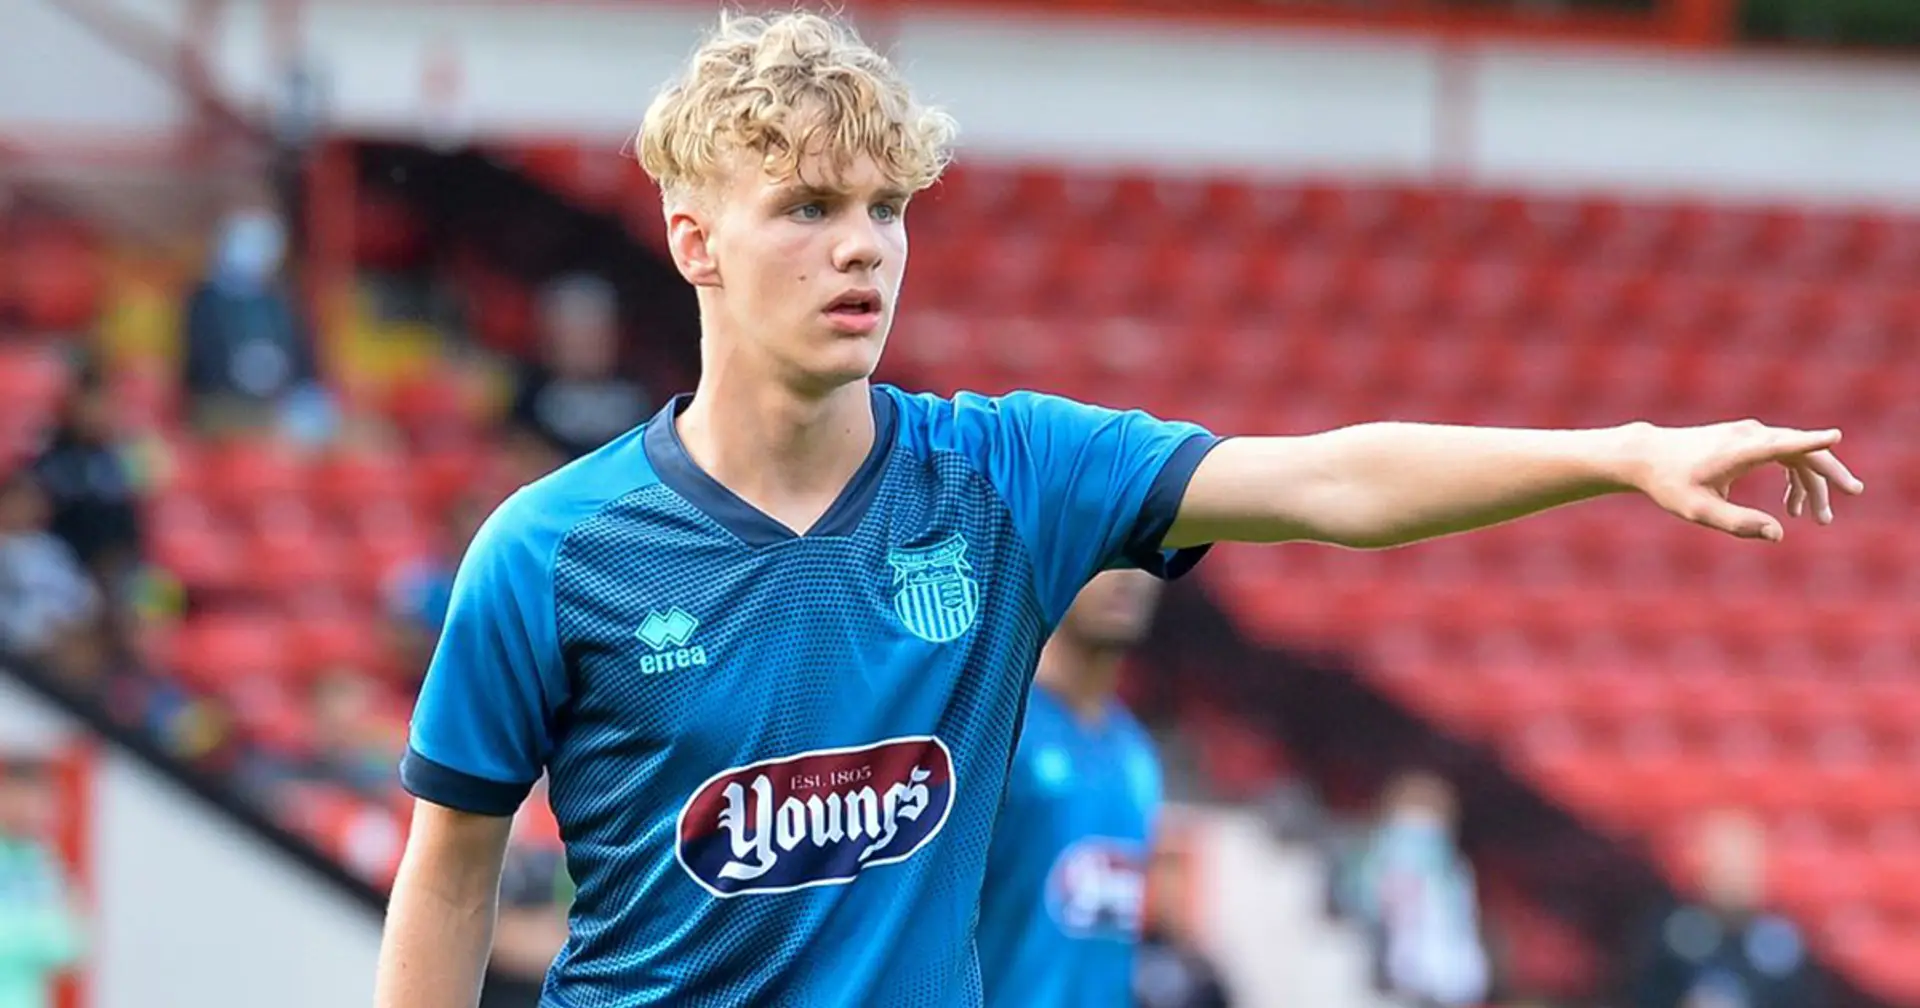 The Athletic: Chelsea interested in 2 League Two starlets - both have made senior debuts as 15-year-olds (reliability: 5 stars)